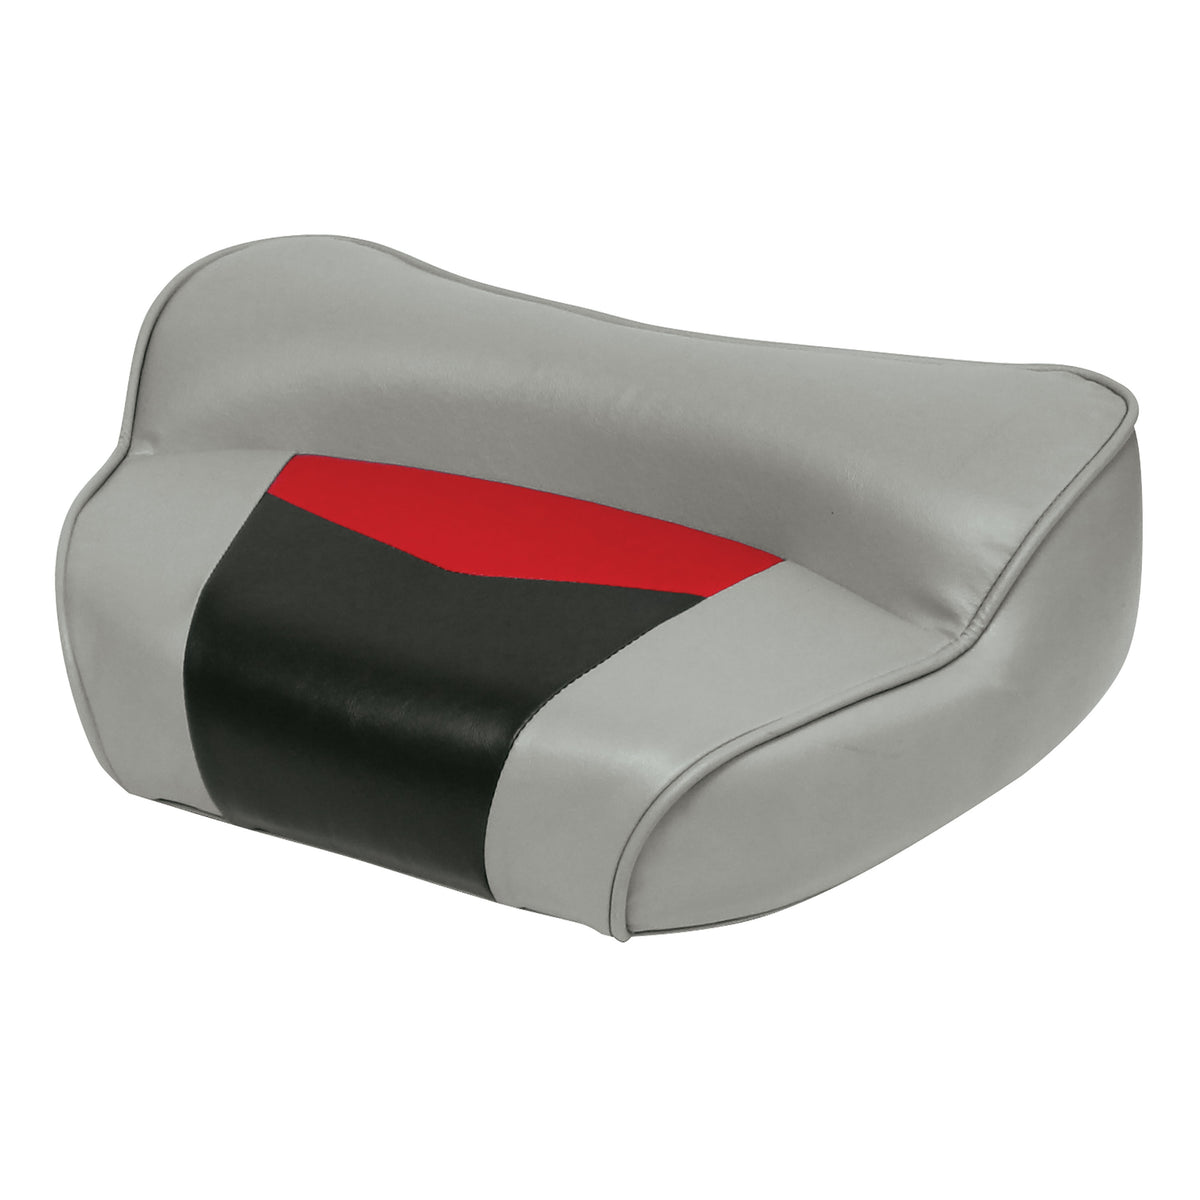 Wise 3308-1881 Pro Casting Seat Marble/Regal Red/Charcoal